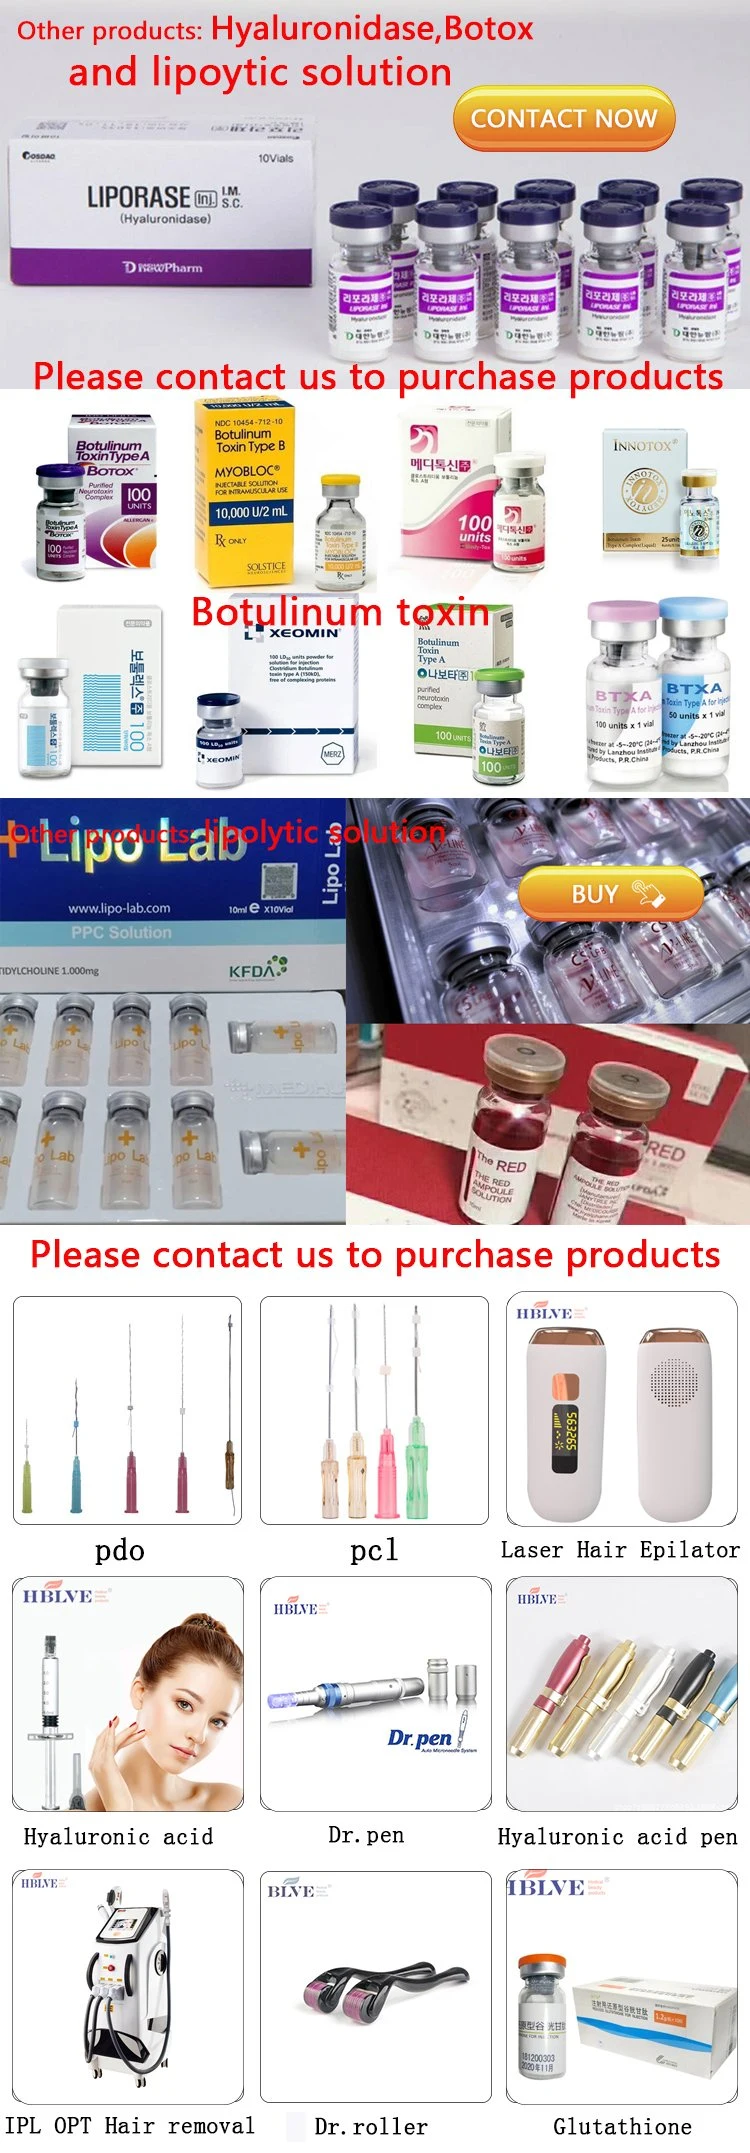 Long-Lasting Lipo Lab Lipolytic Solution Ppc Solution for Fat Loss Injection